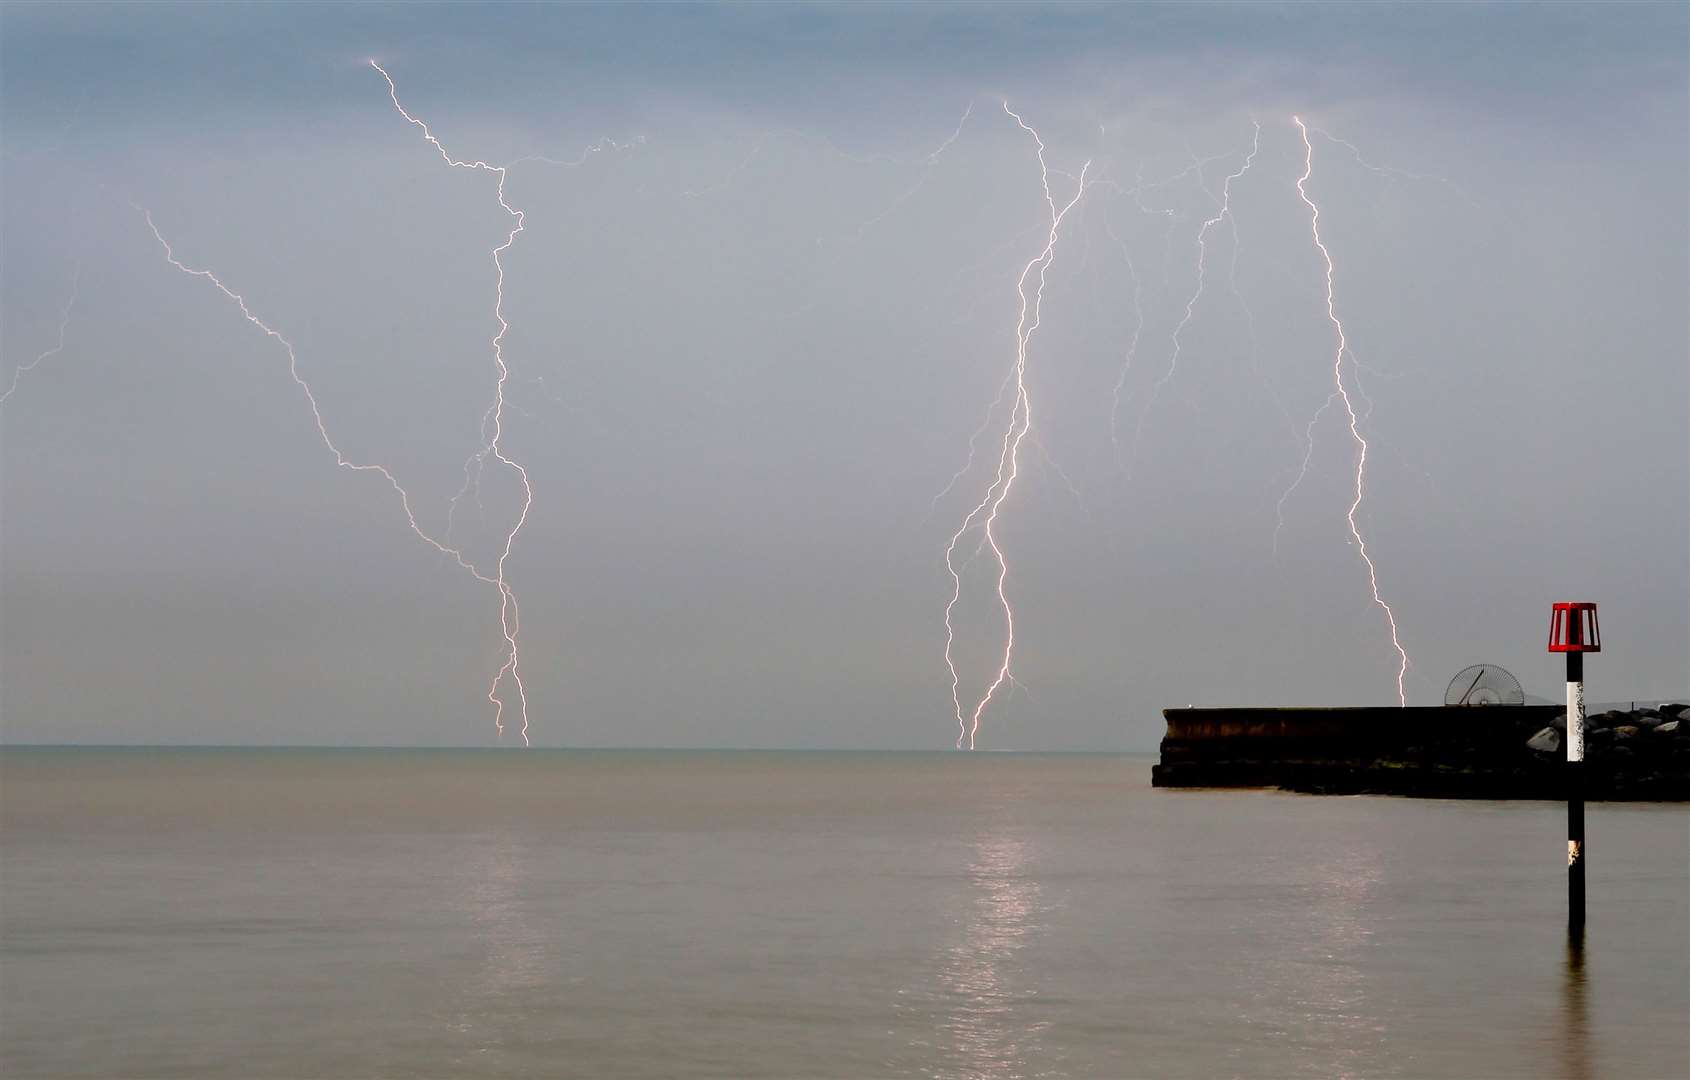 Thunderstorms are predicted for Thursday. Picture: Shine Pix Ltd / Shaun Fellows